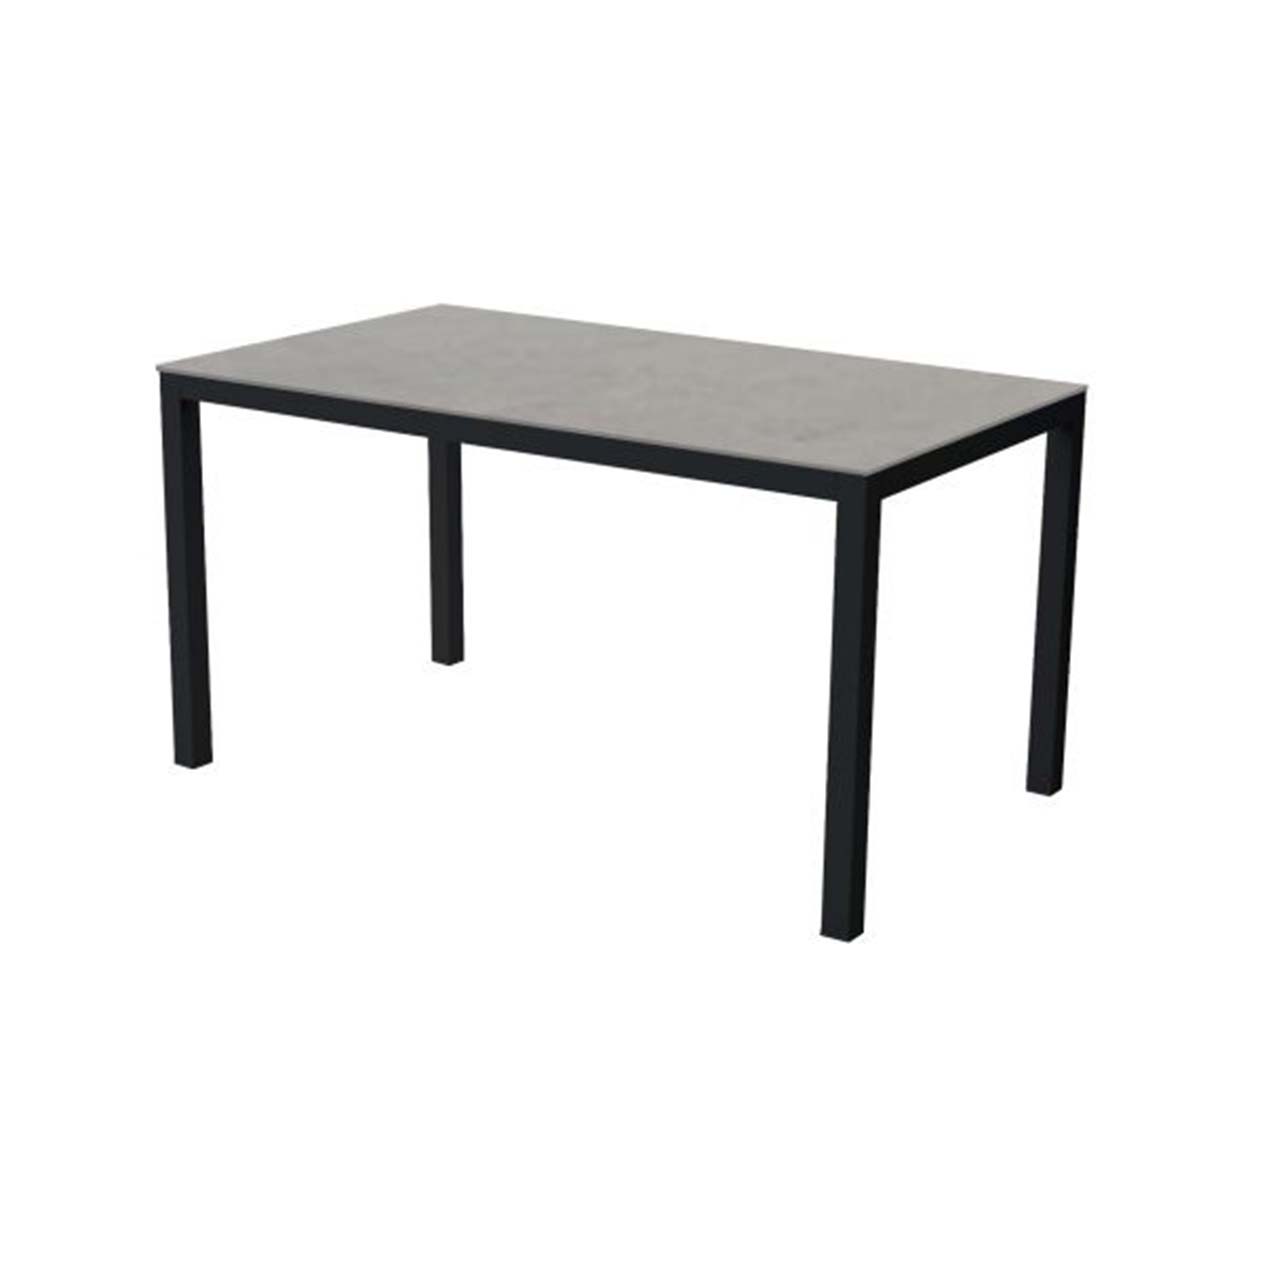 Lisbon Outdoor Ceramic Dining Table featuring a smooth ceramic tabletop and a sleek charcoal metal frame, all displayed against a stark white background.